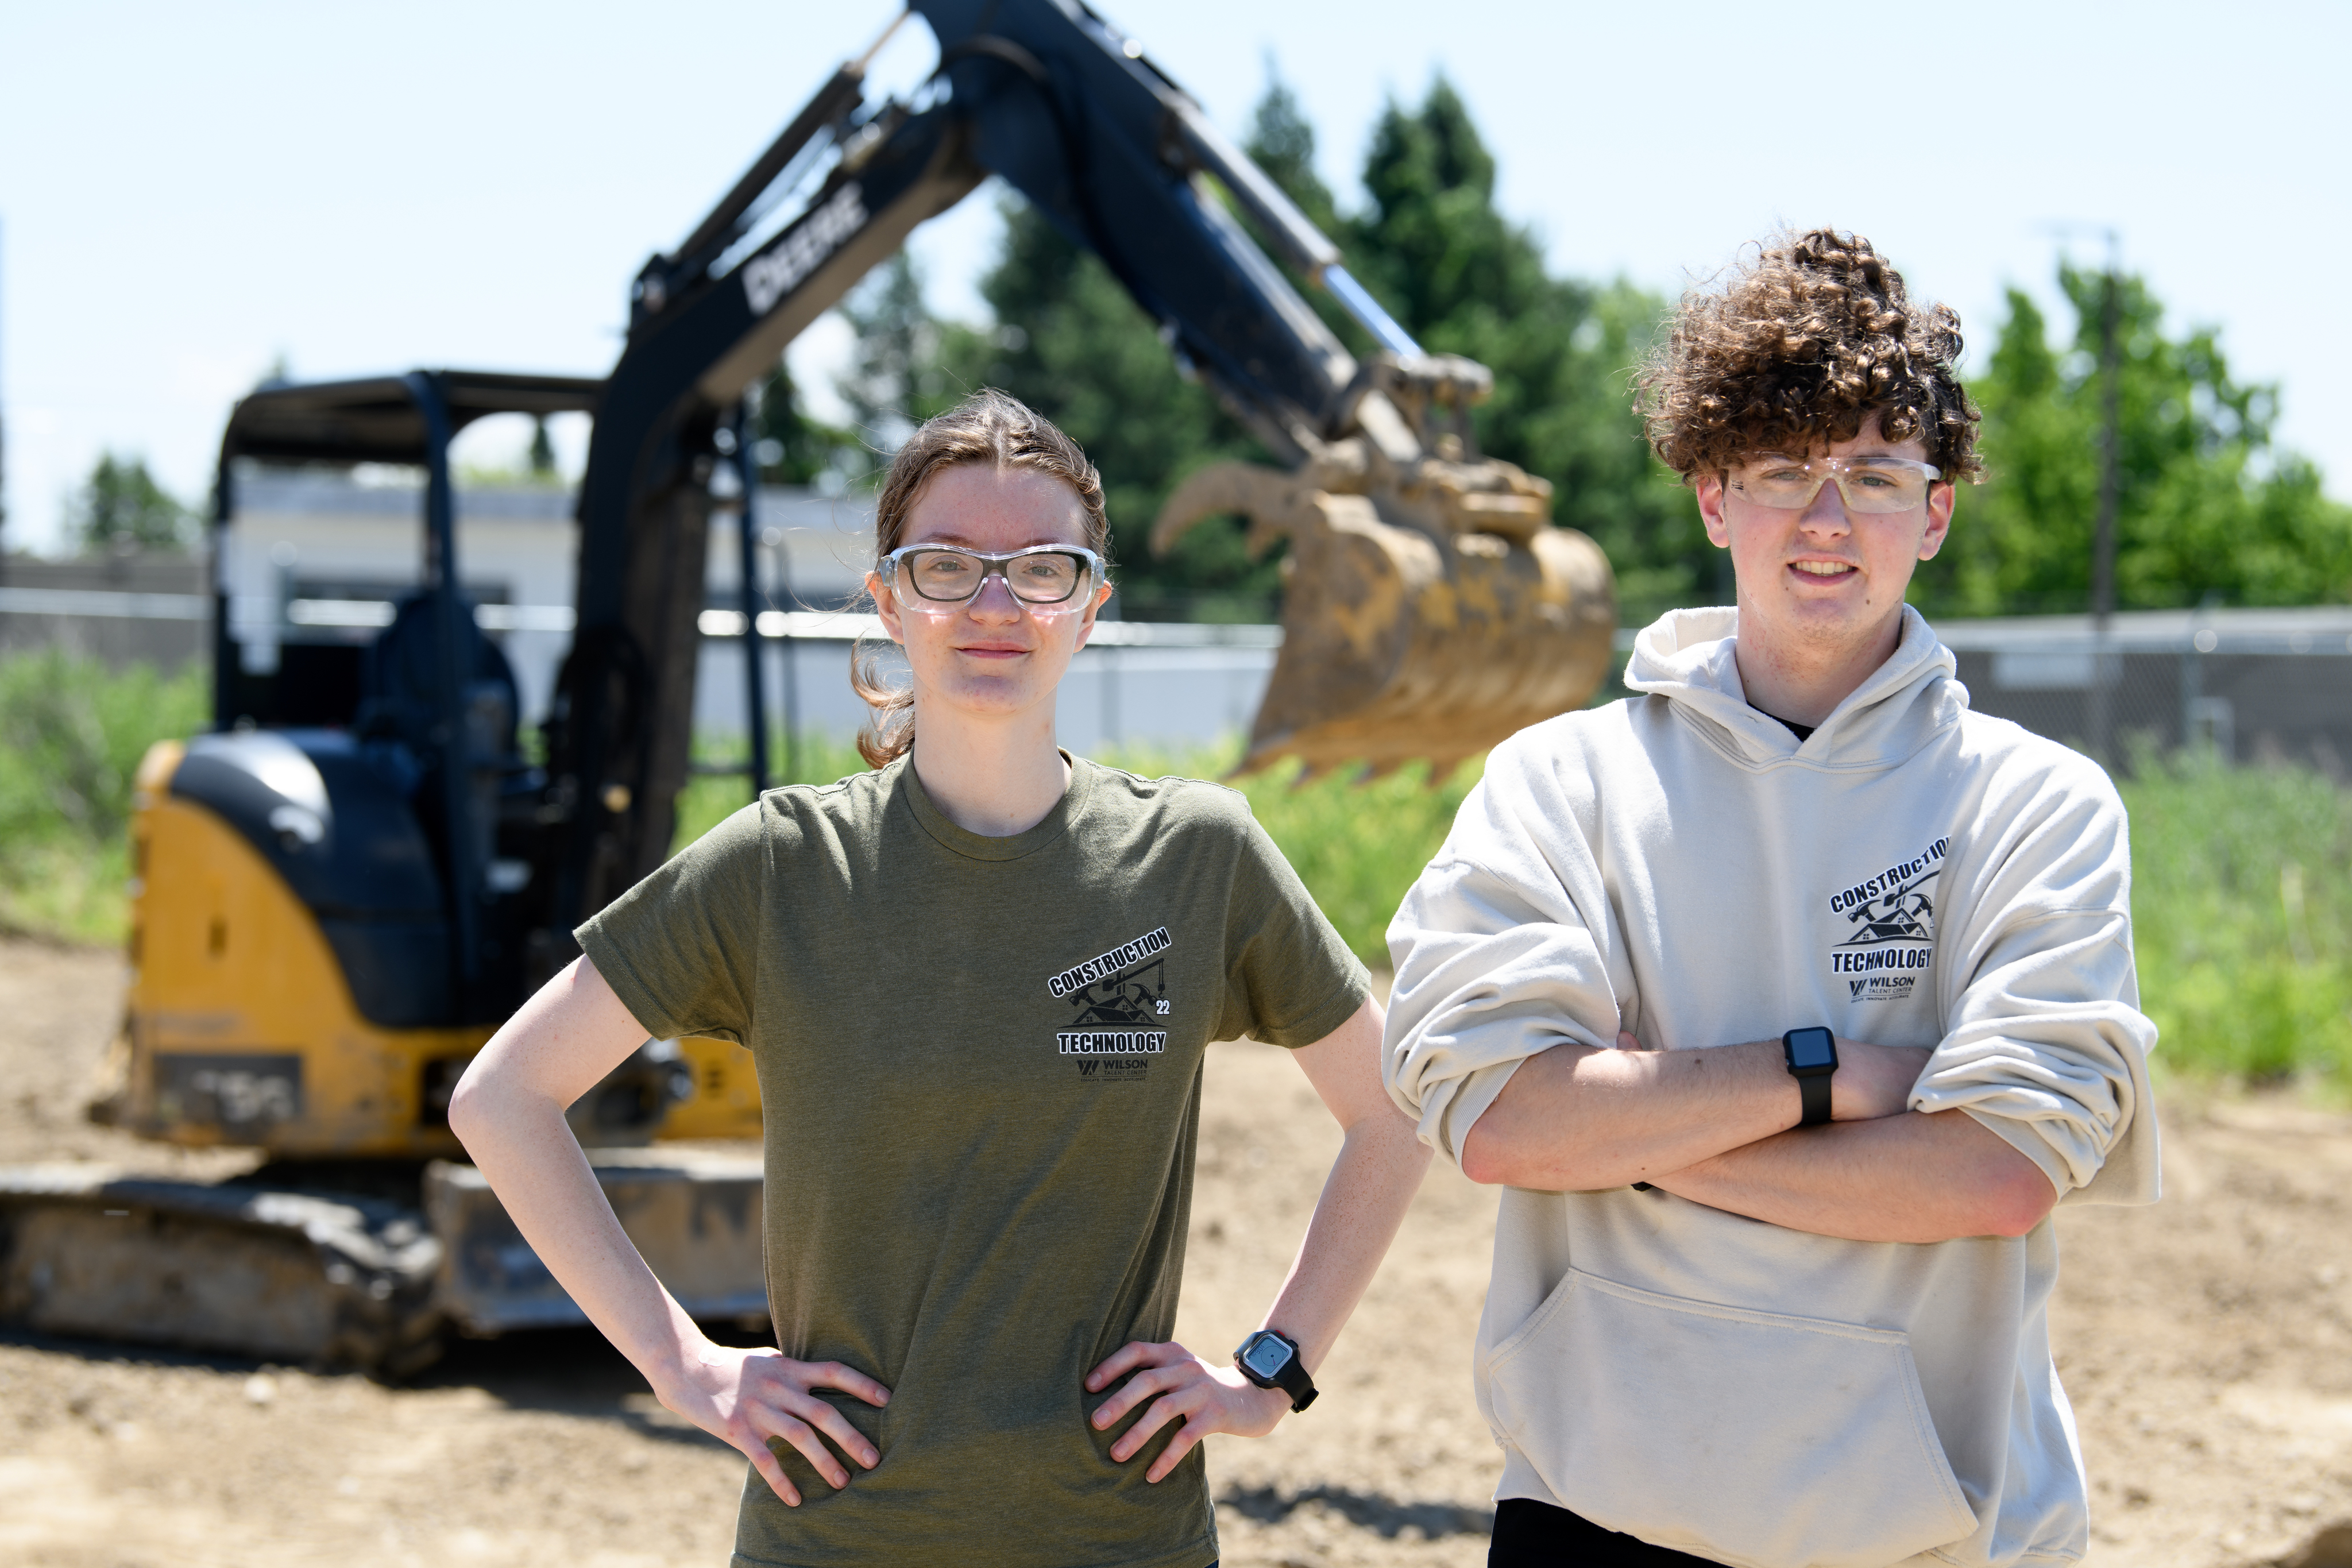 Female and male Construction students stand in the dirt in front of a bulldozer.